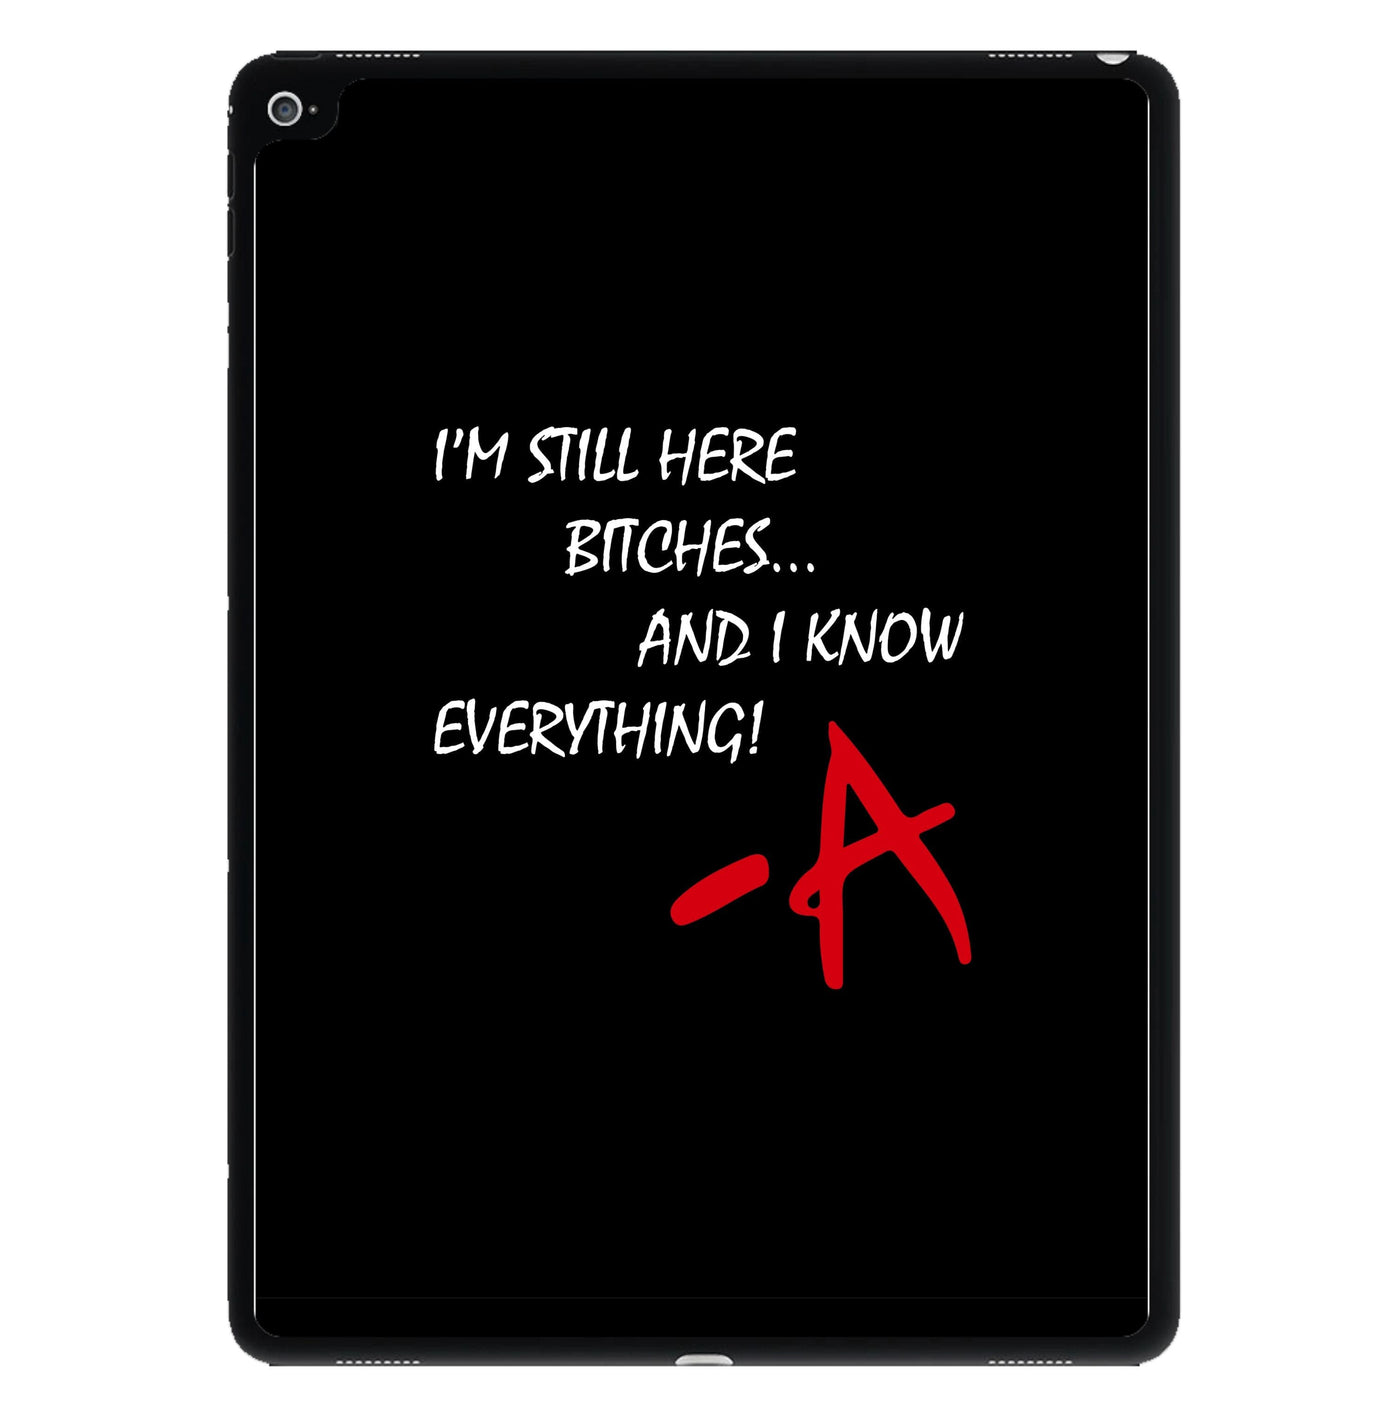 I'm Still Here and I Know Everything - Pretty Little Liars iPad Case